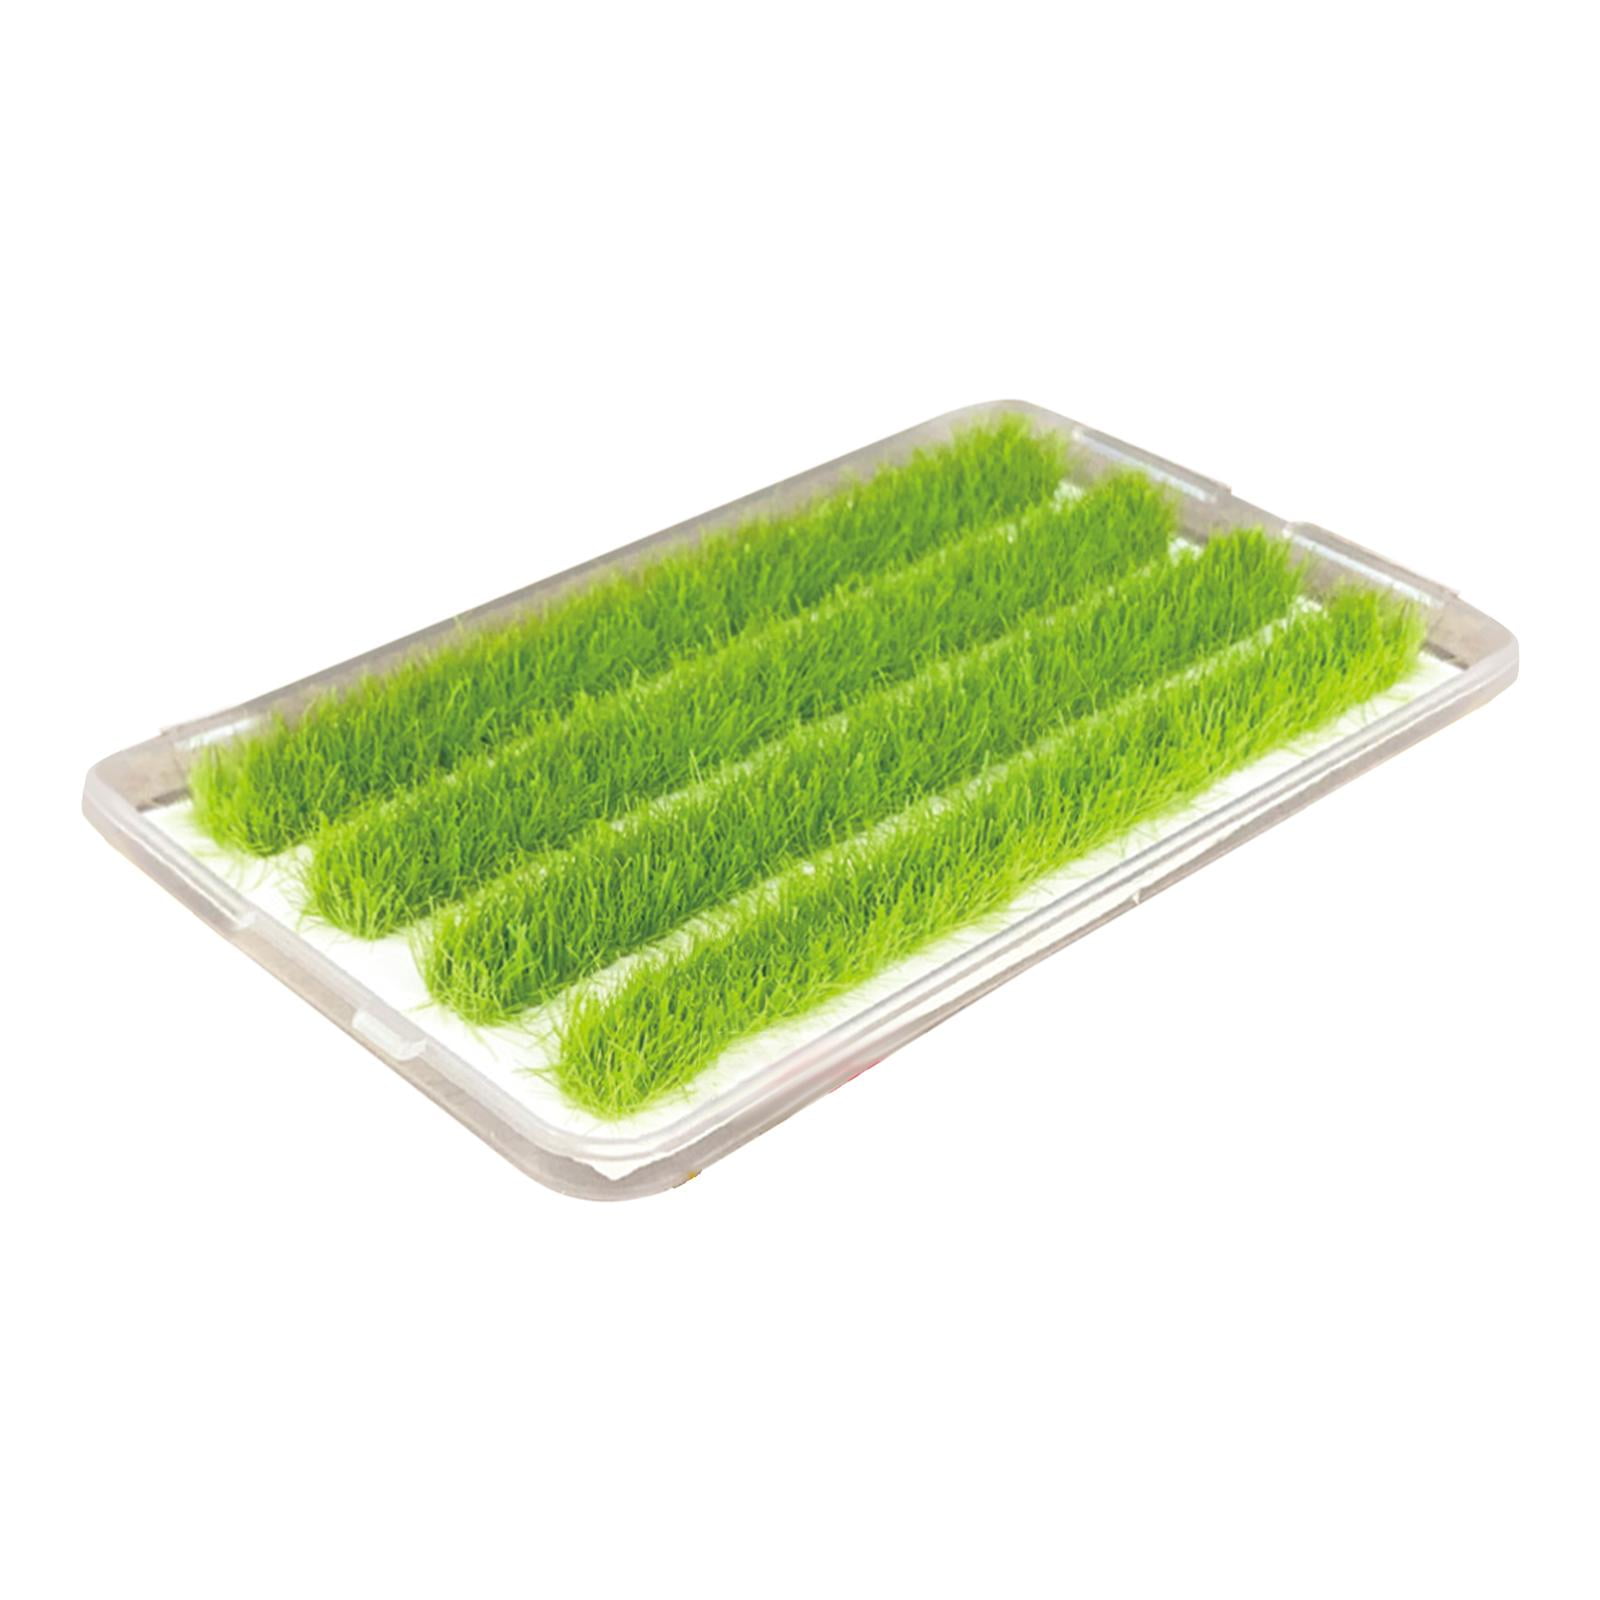 Self Adhesive Grass Tufts Diorama Layout Miniature Scenery Grass Groups Grass Tuft Model for Desk Railroad Scenery Scenery Landscape B, Size: 9 mm